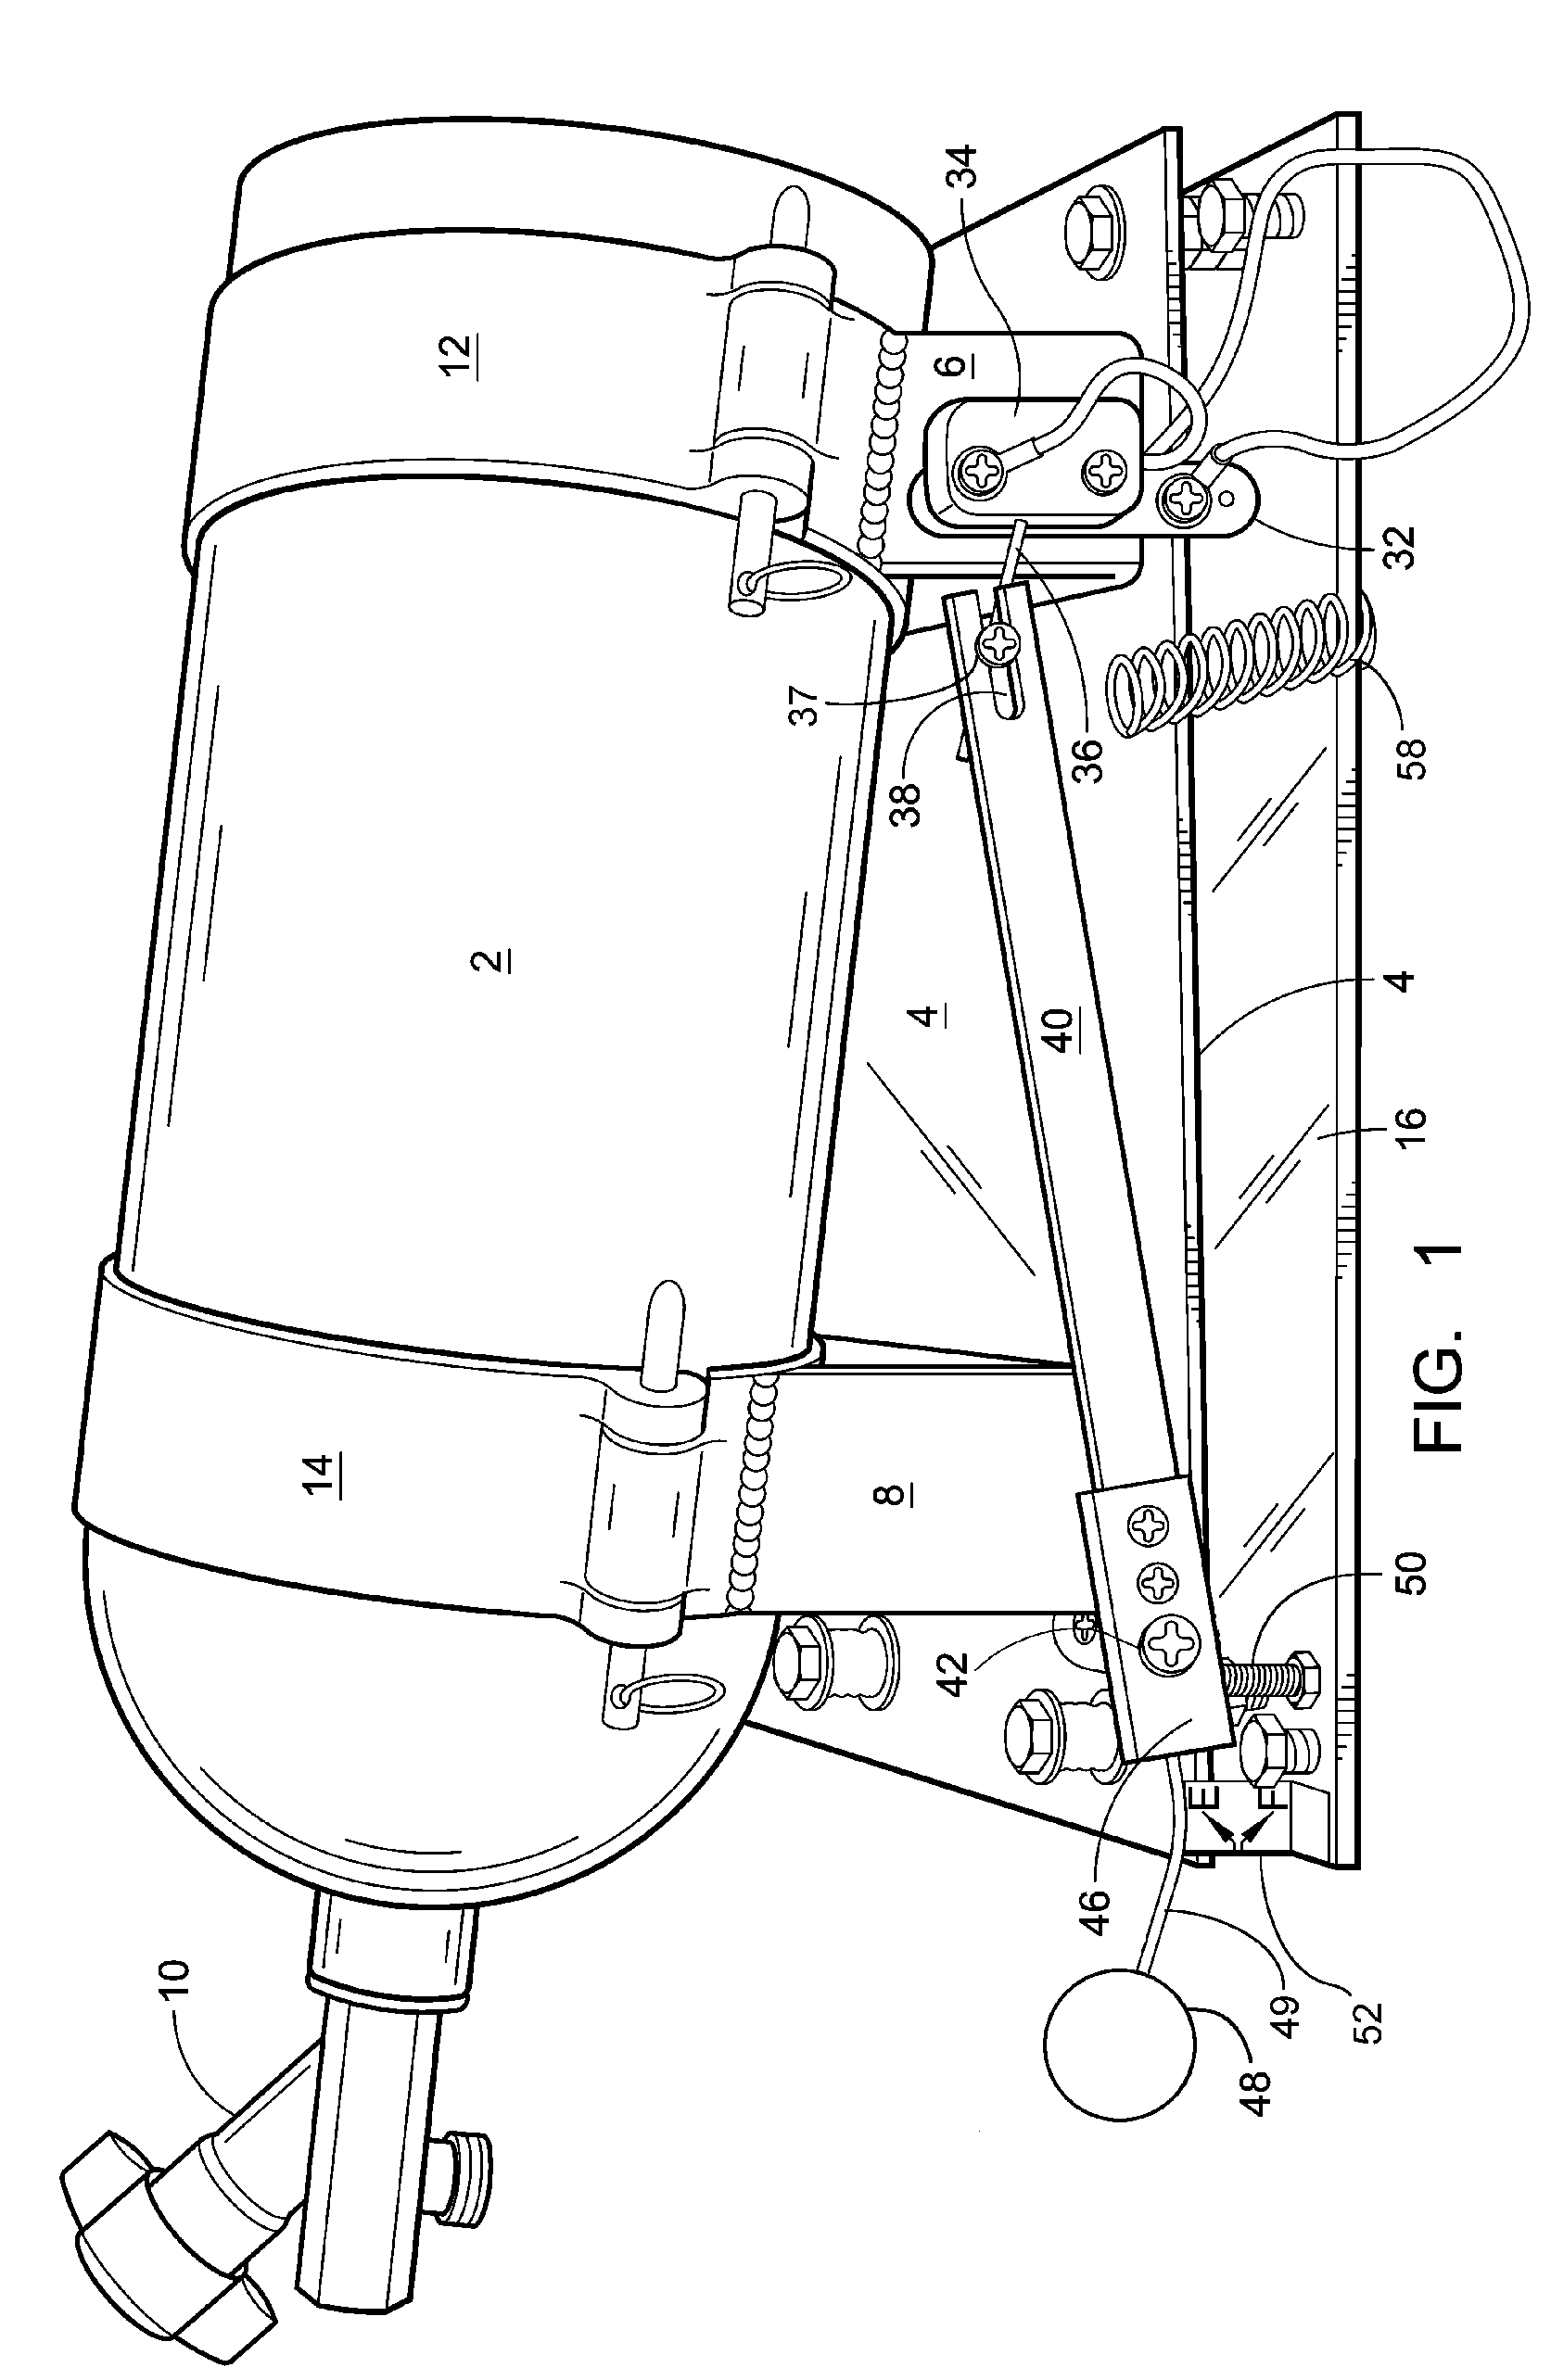 Apparatus for securely mounting and continuously monitoring the weight of a liquified gas tank